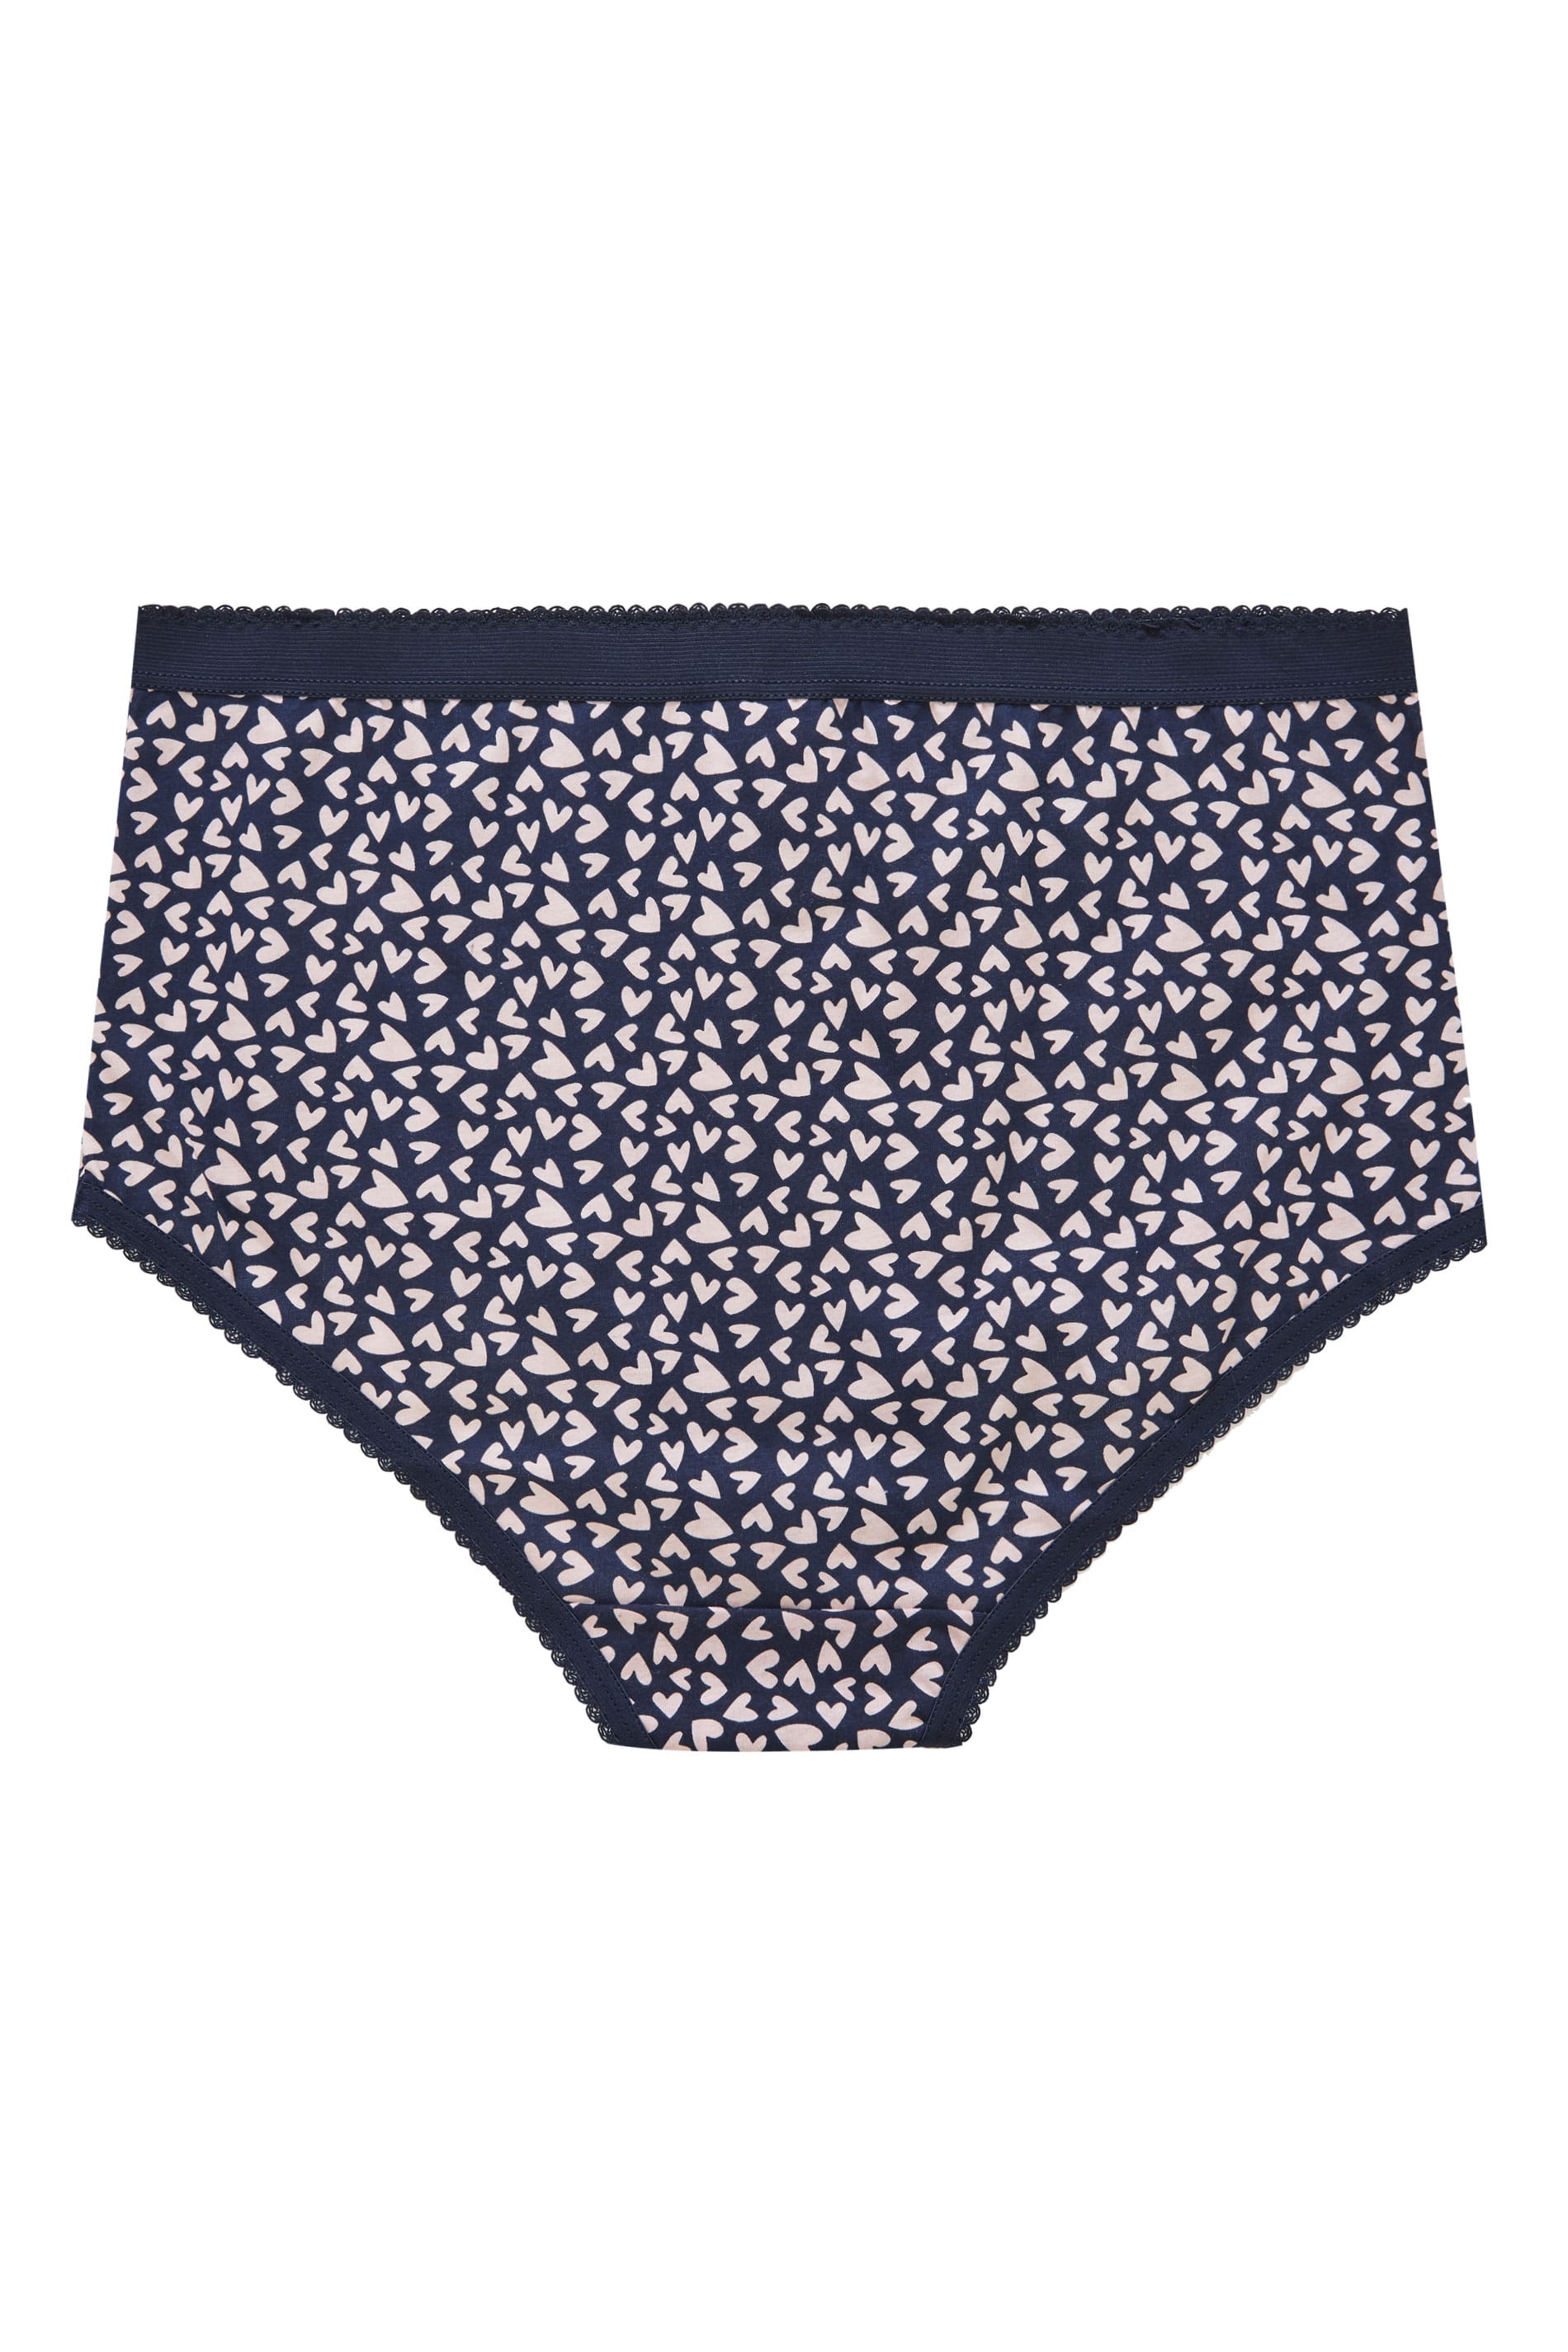 5 PACK Navy Heart & Spot Full Briefs | Yours Clothing